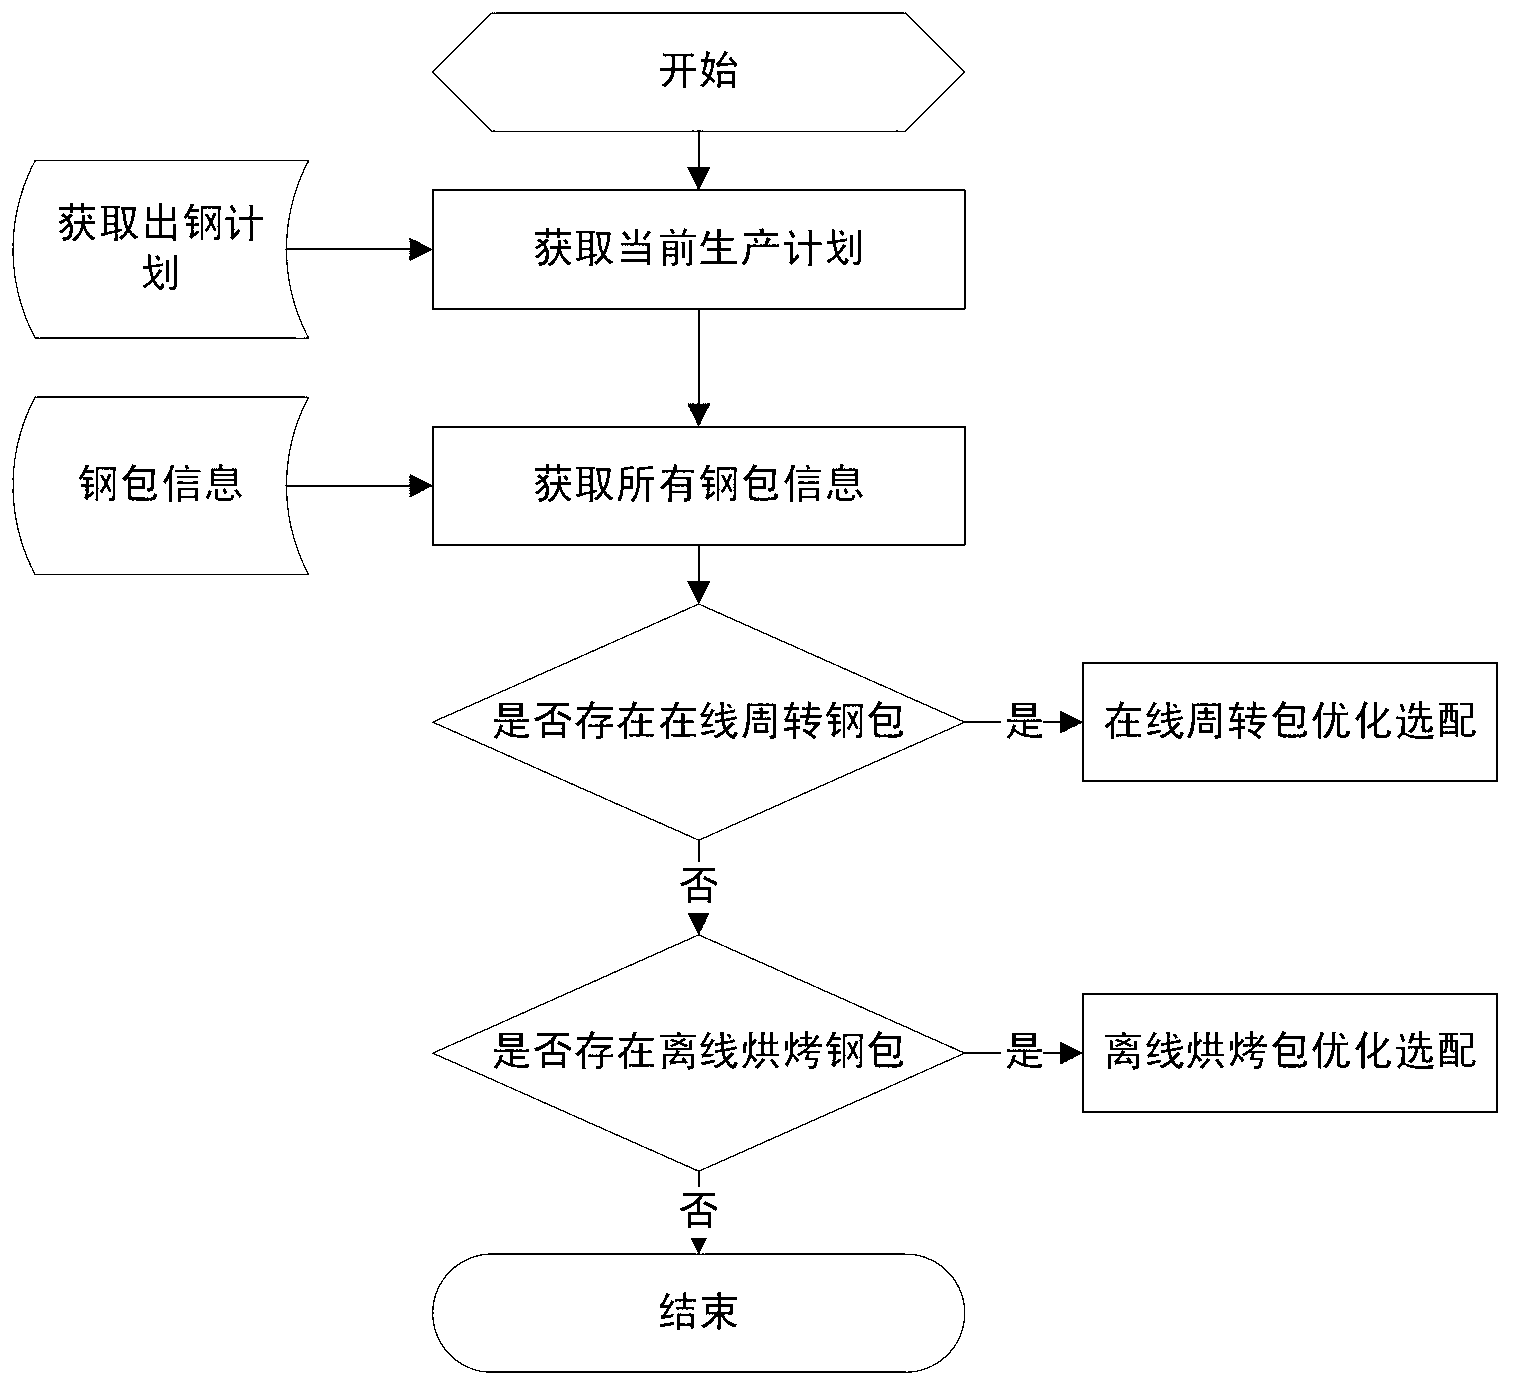 Selection matching method for steel ladles of steel plant